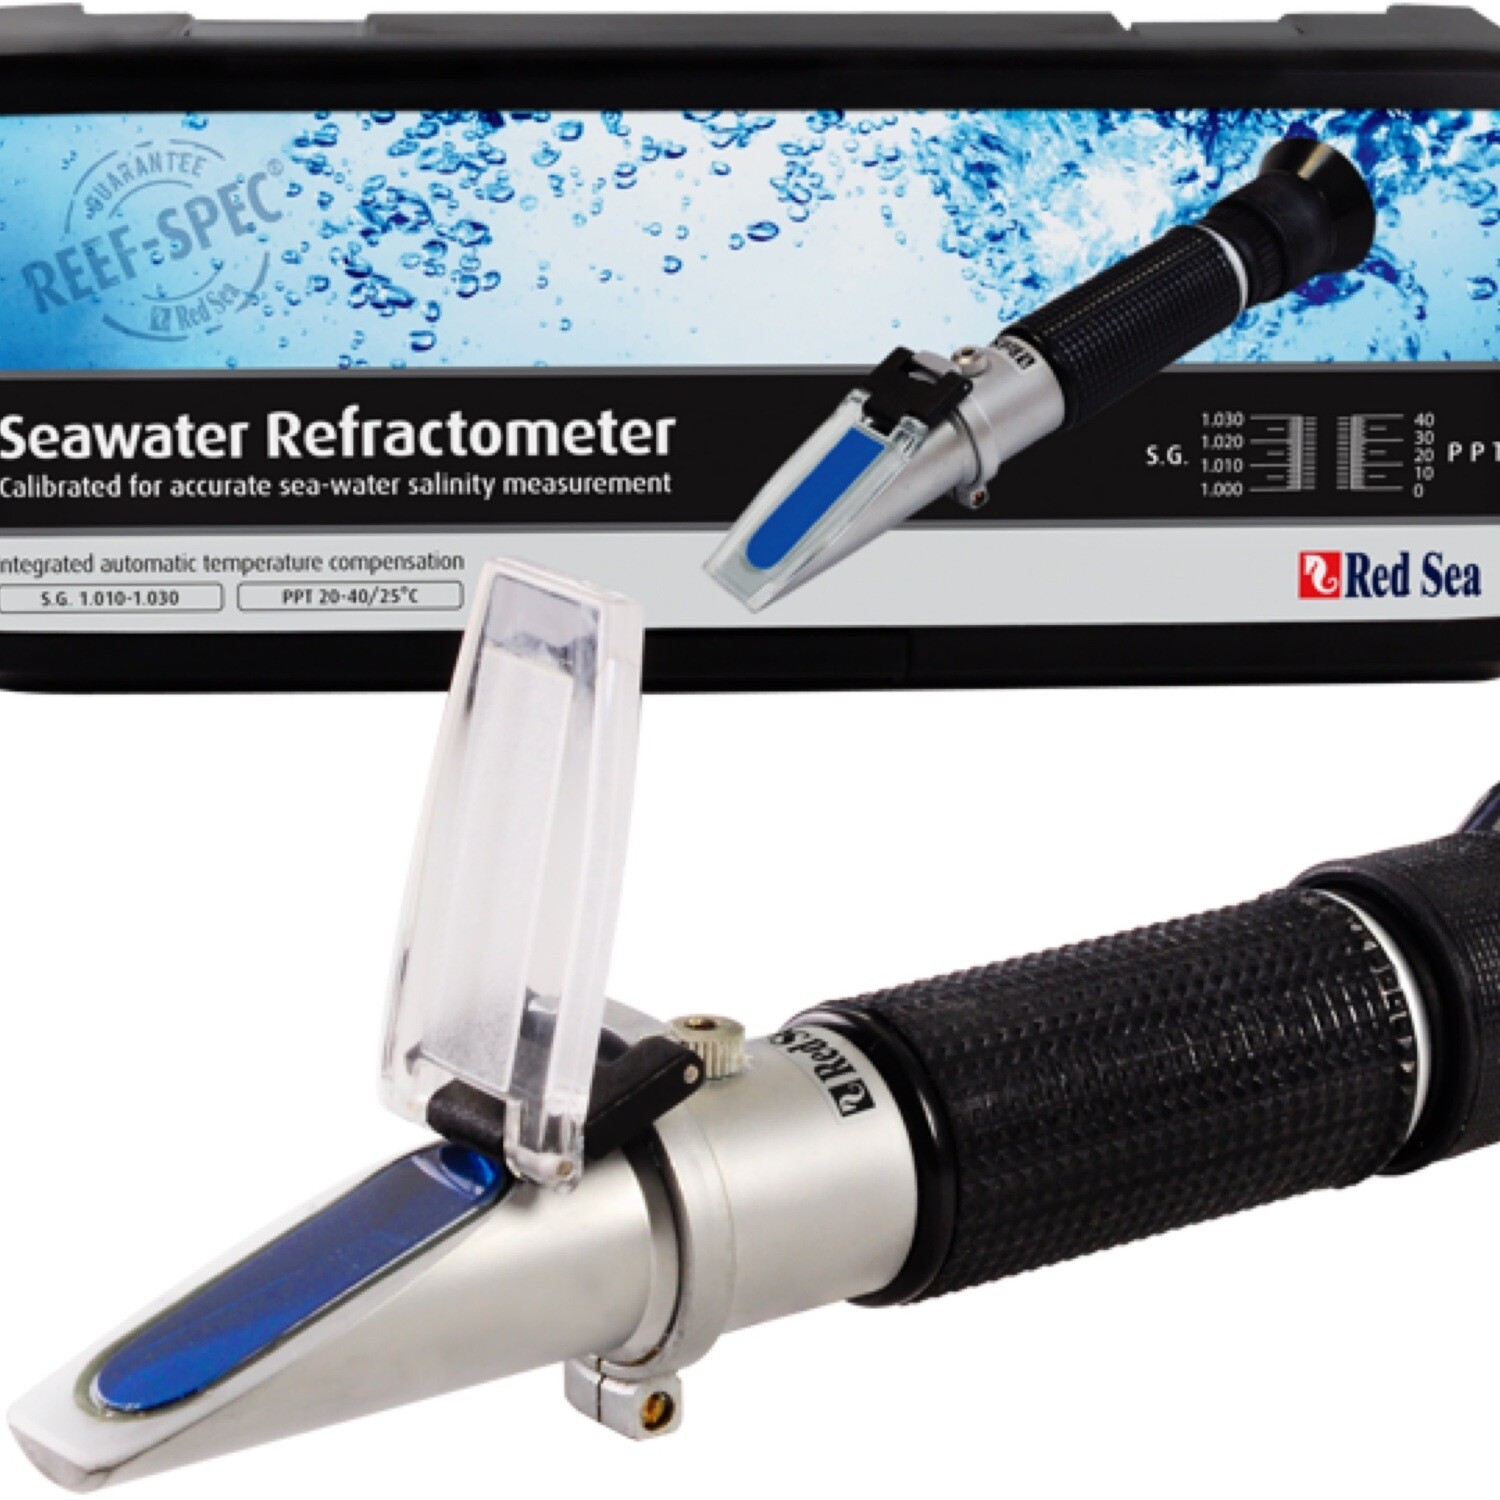 Red Sea High Accuracy Seawater Refractometer